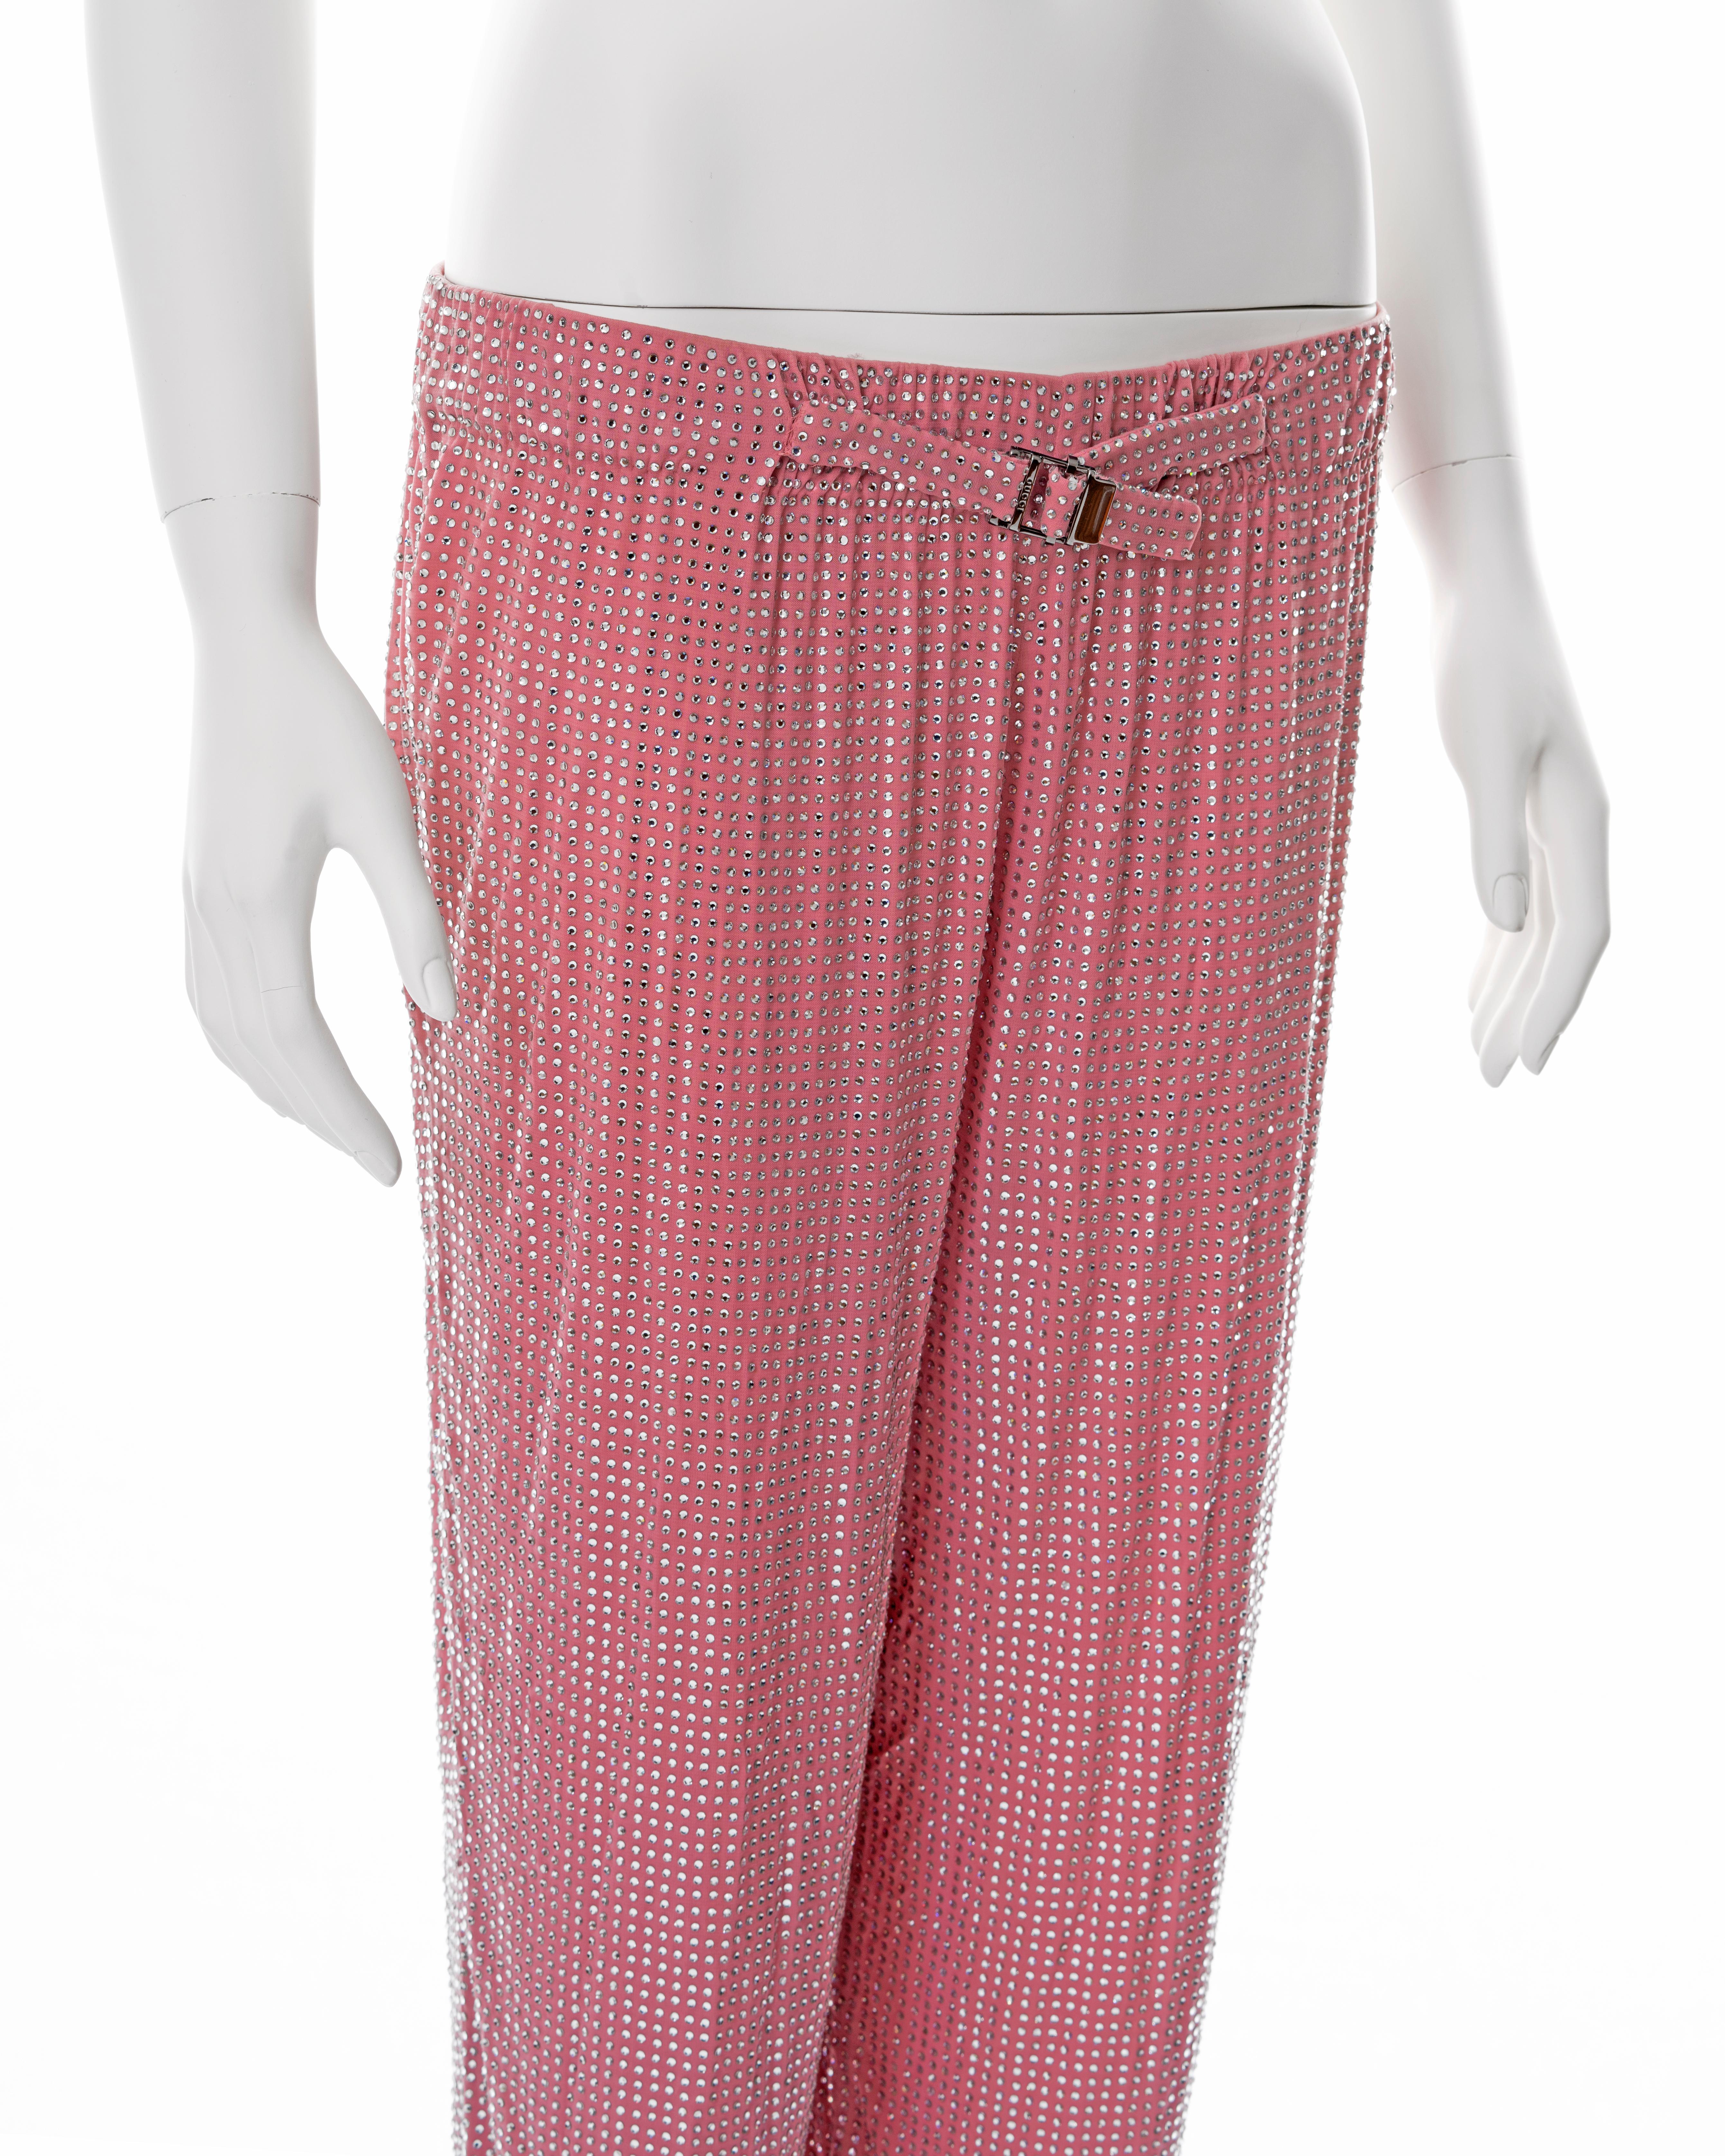 Gucci by Tom Ford pink crystal beaded low rise evening pants, ss 2000 For Sale 3